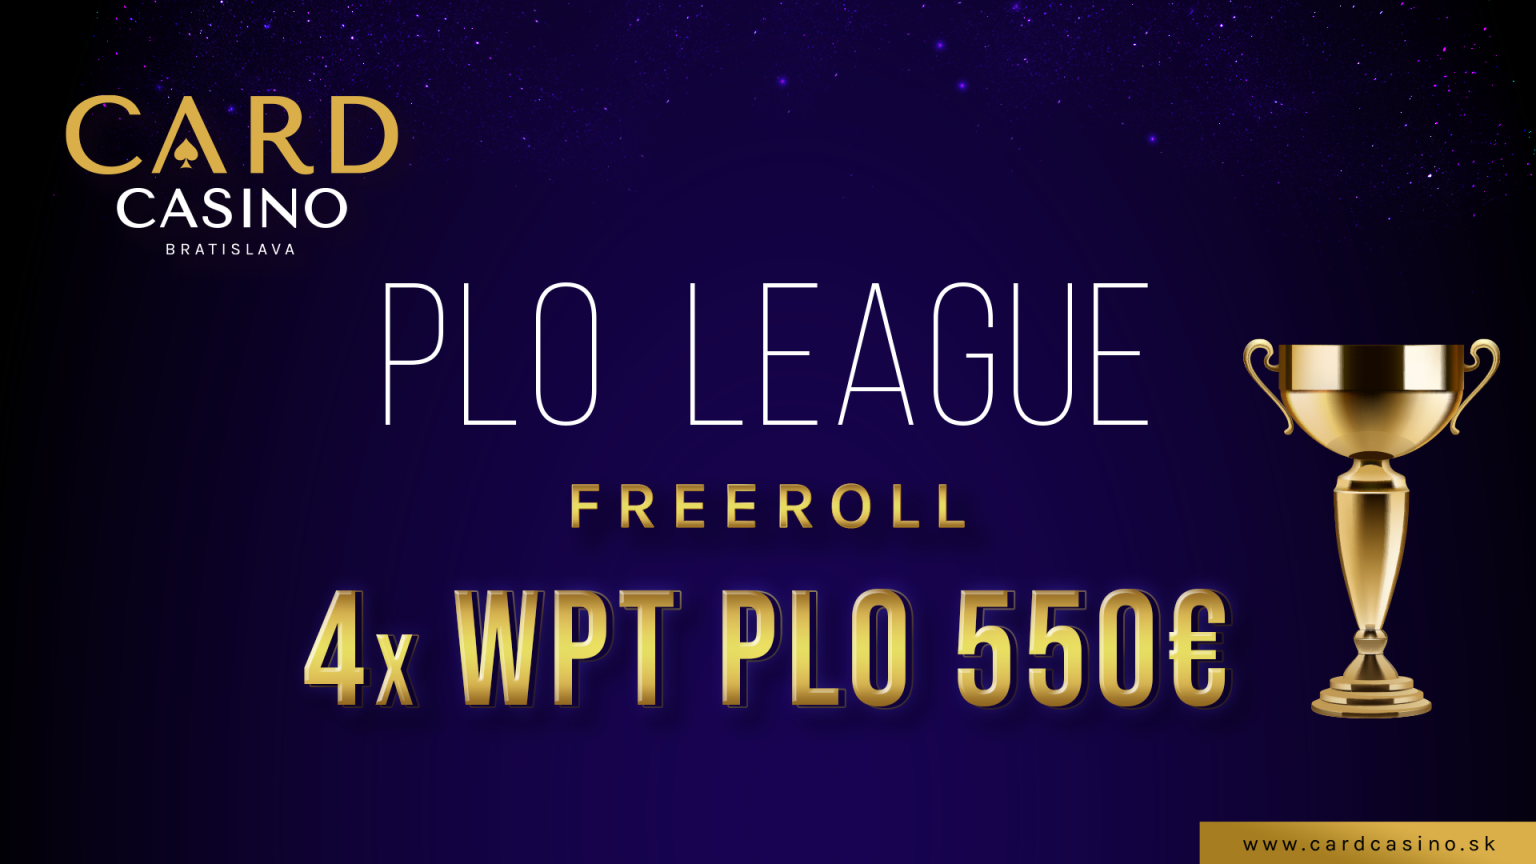 The popular PLO league continues. 4 tickets to the WPT are up for grabs!